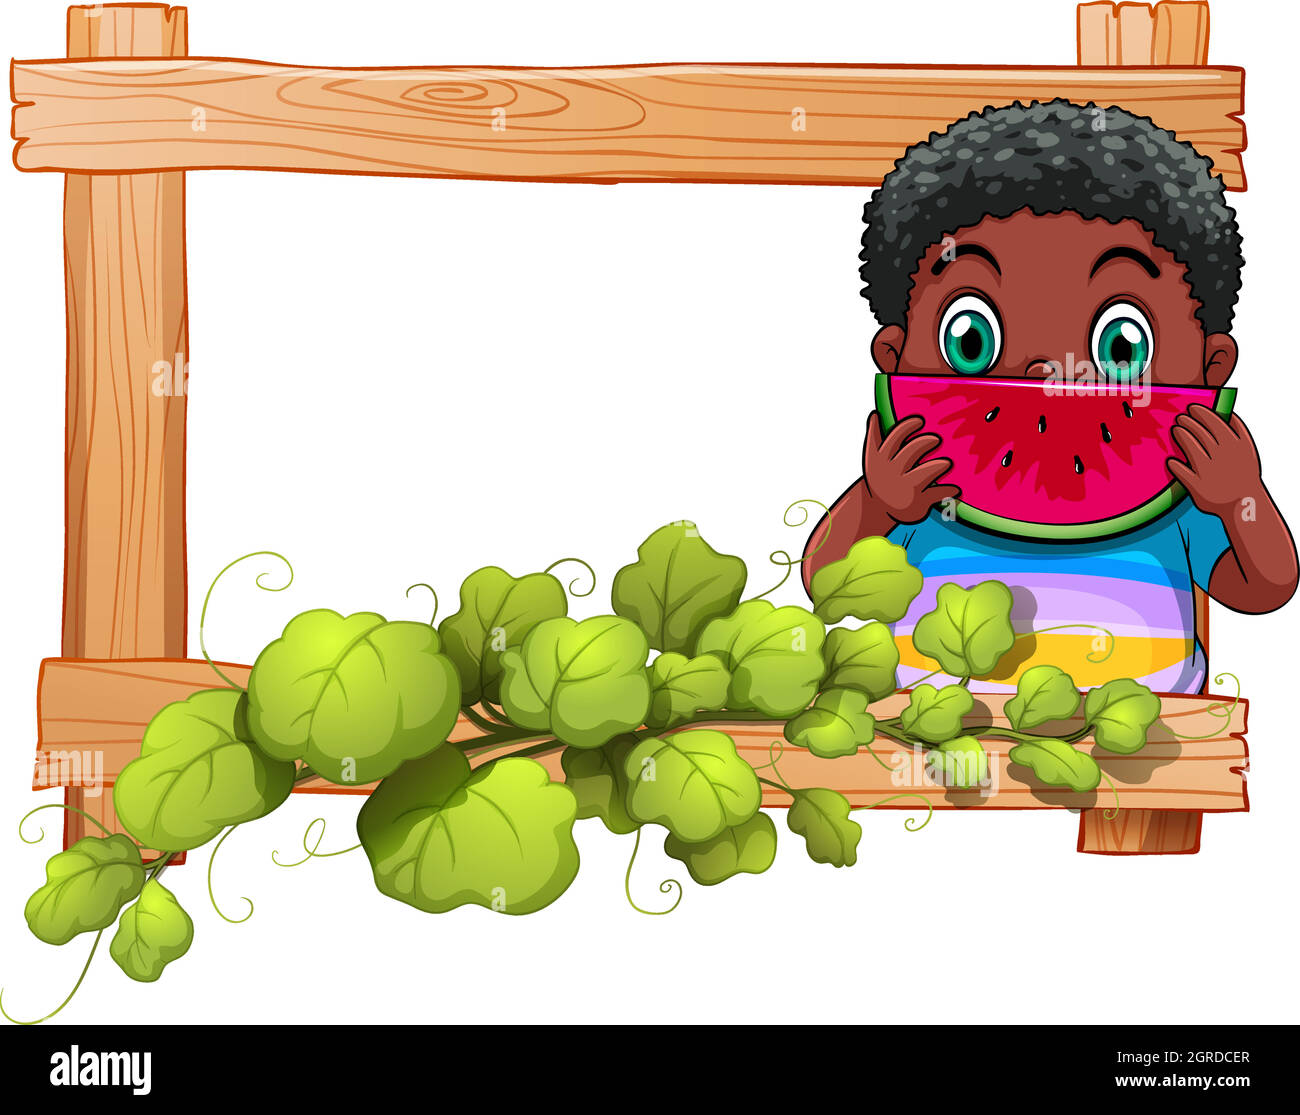 A wooden frame with a boy eating watermelon Stock Vector